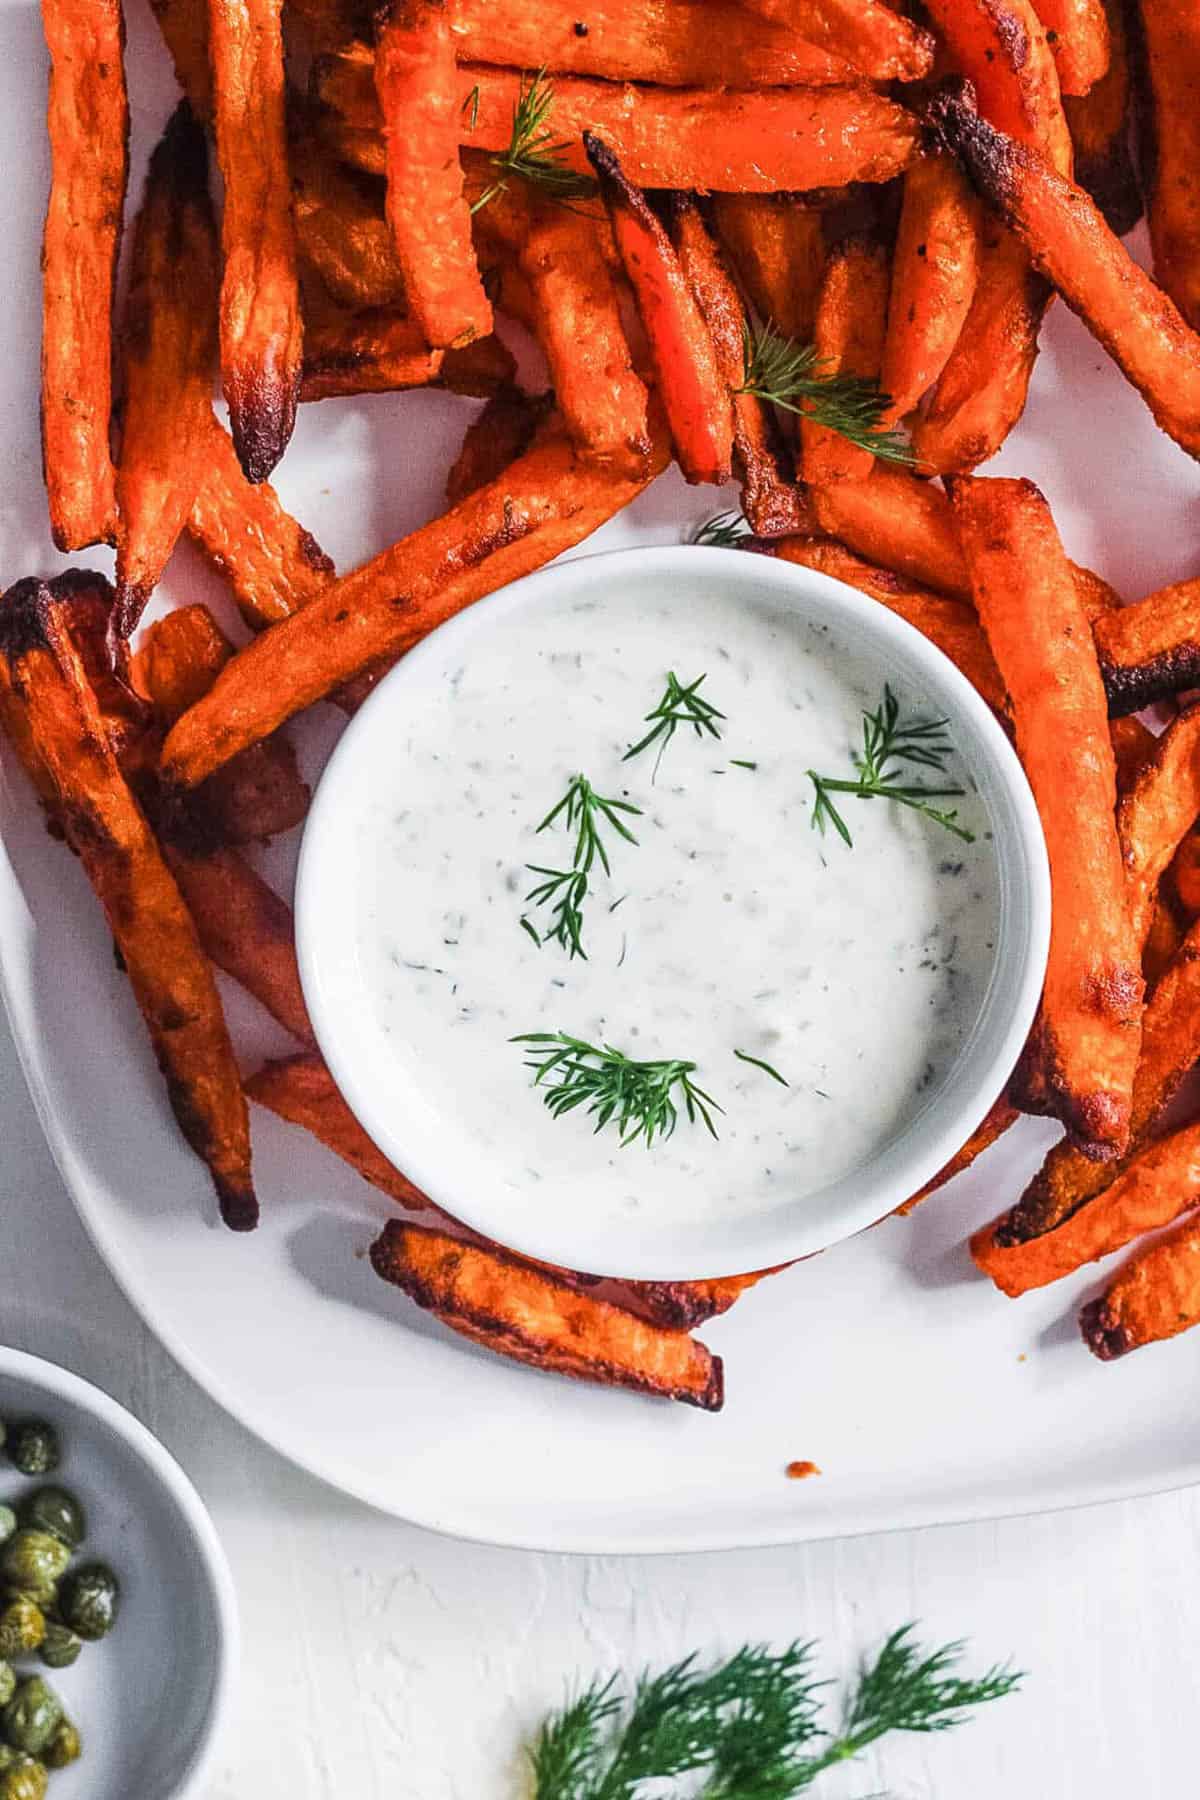 Homemade vegan tartar sauce served in a white bowl, with sweet potato fries on the side.